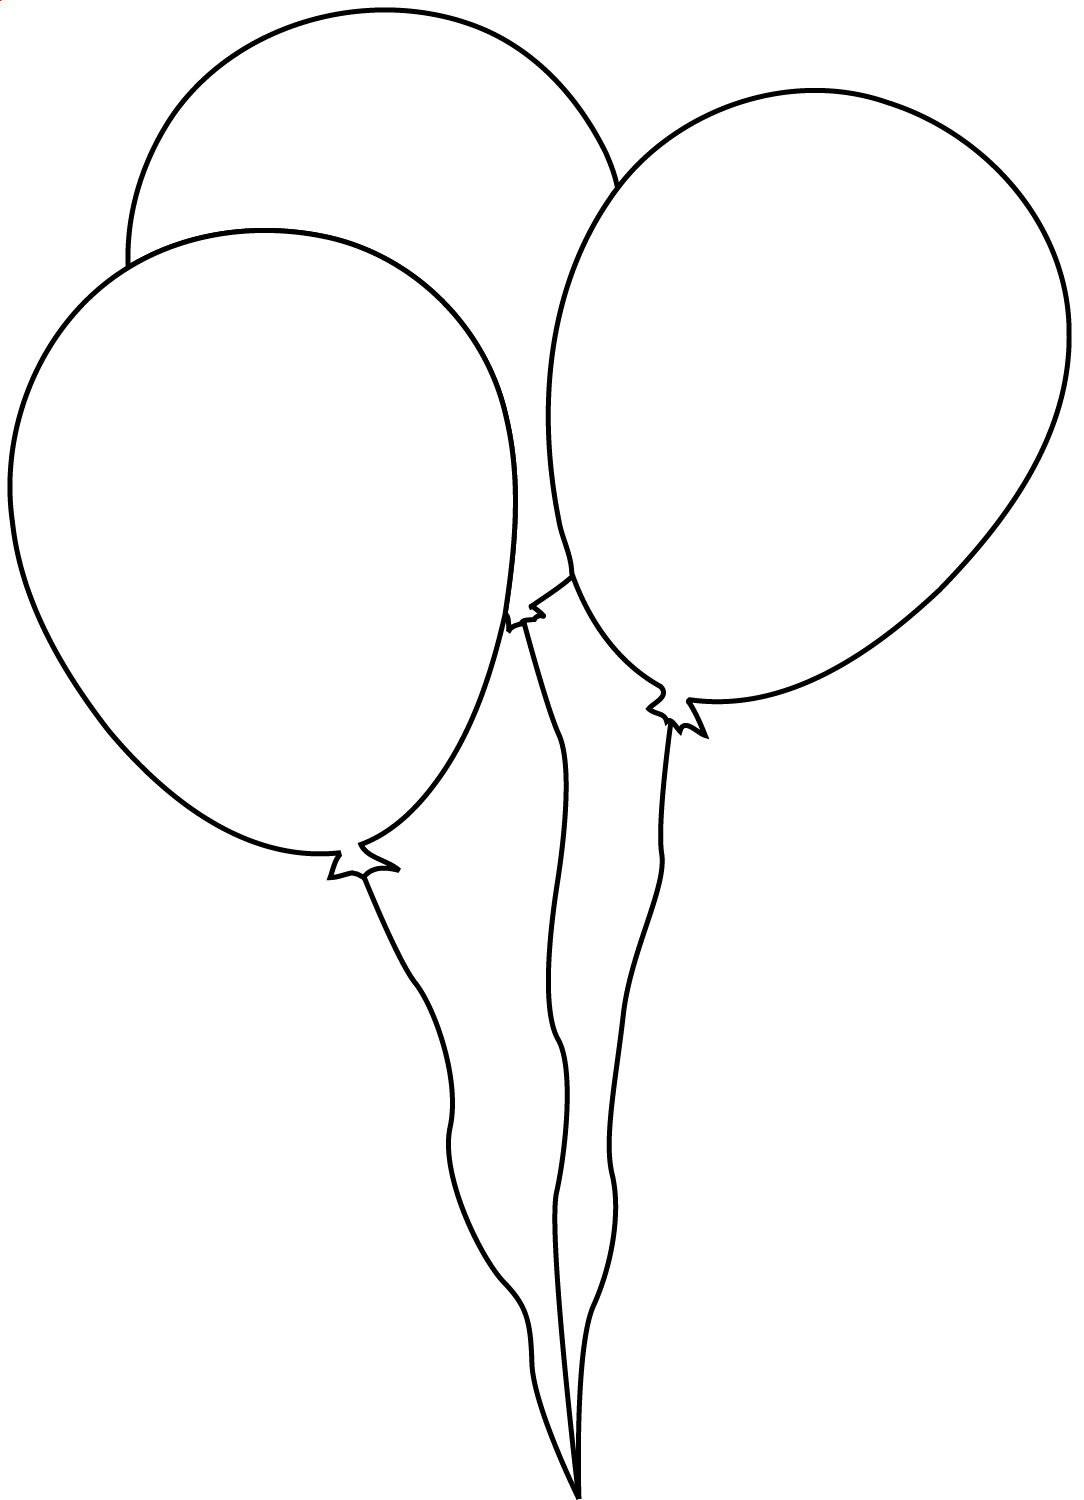 New Three Balloons Coloring Page